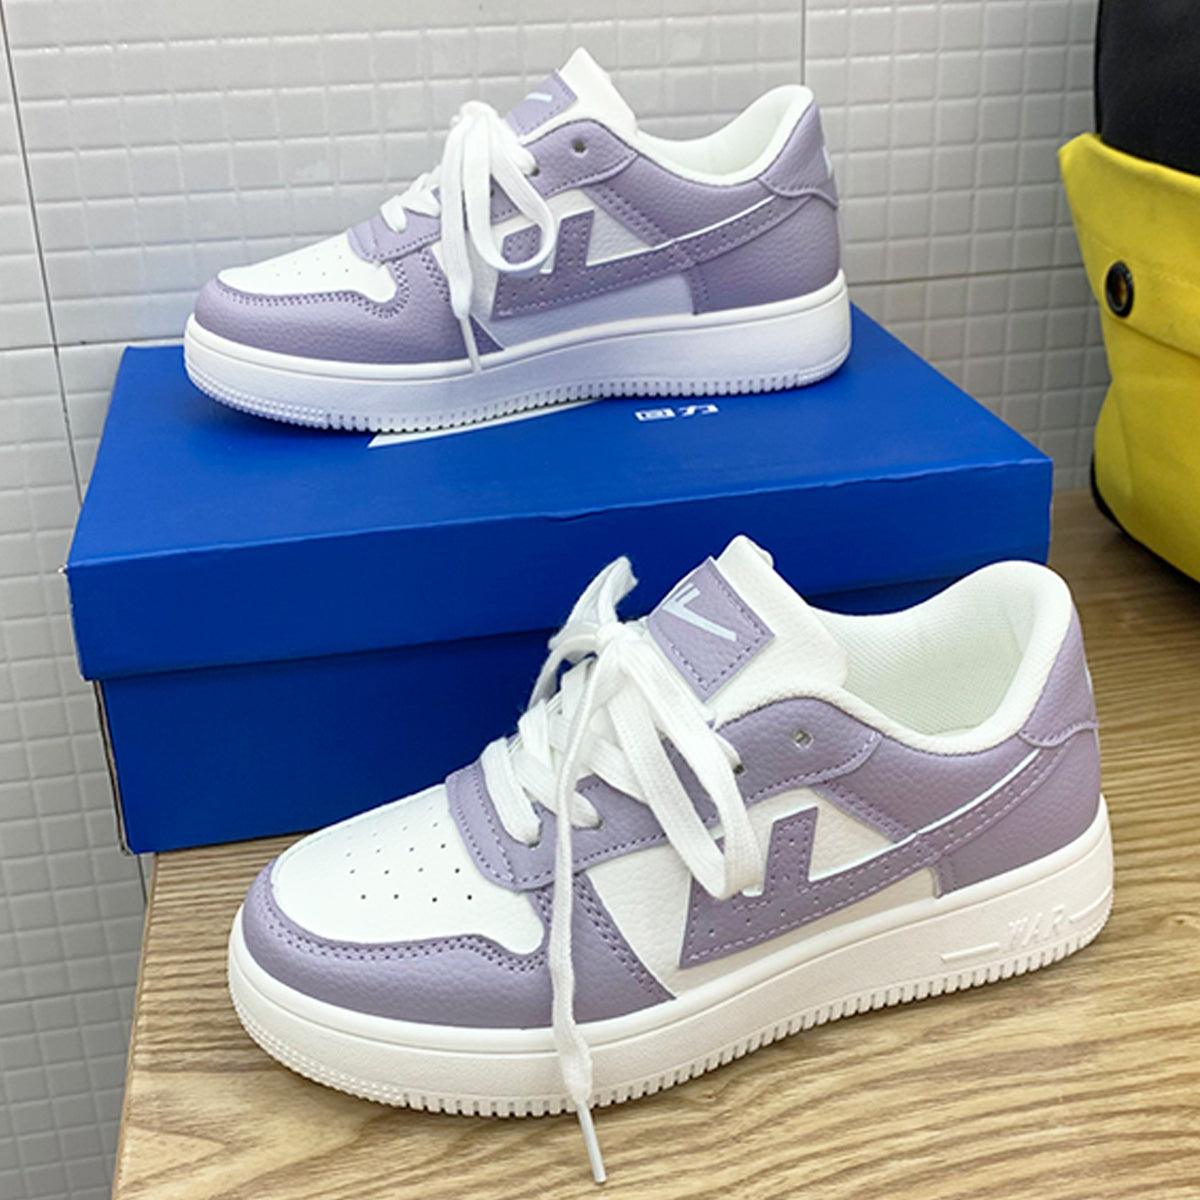 Pale Purple Air Aesthetic Sneakers - Aesthetic Clothes Shop